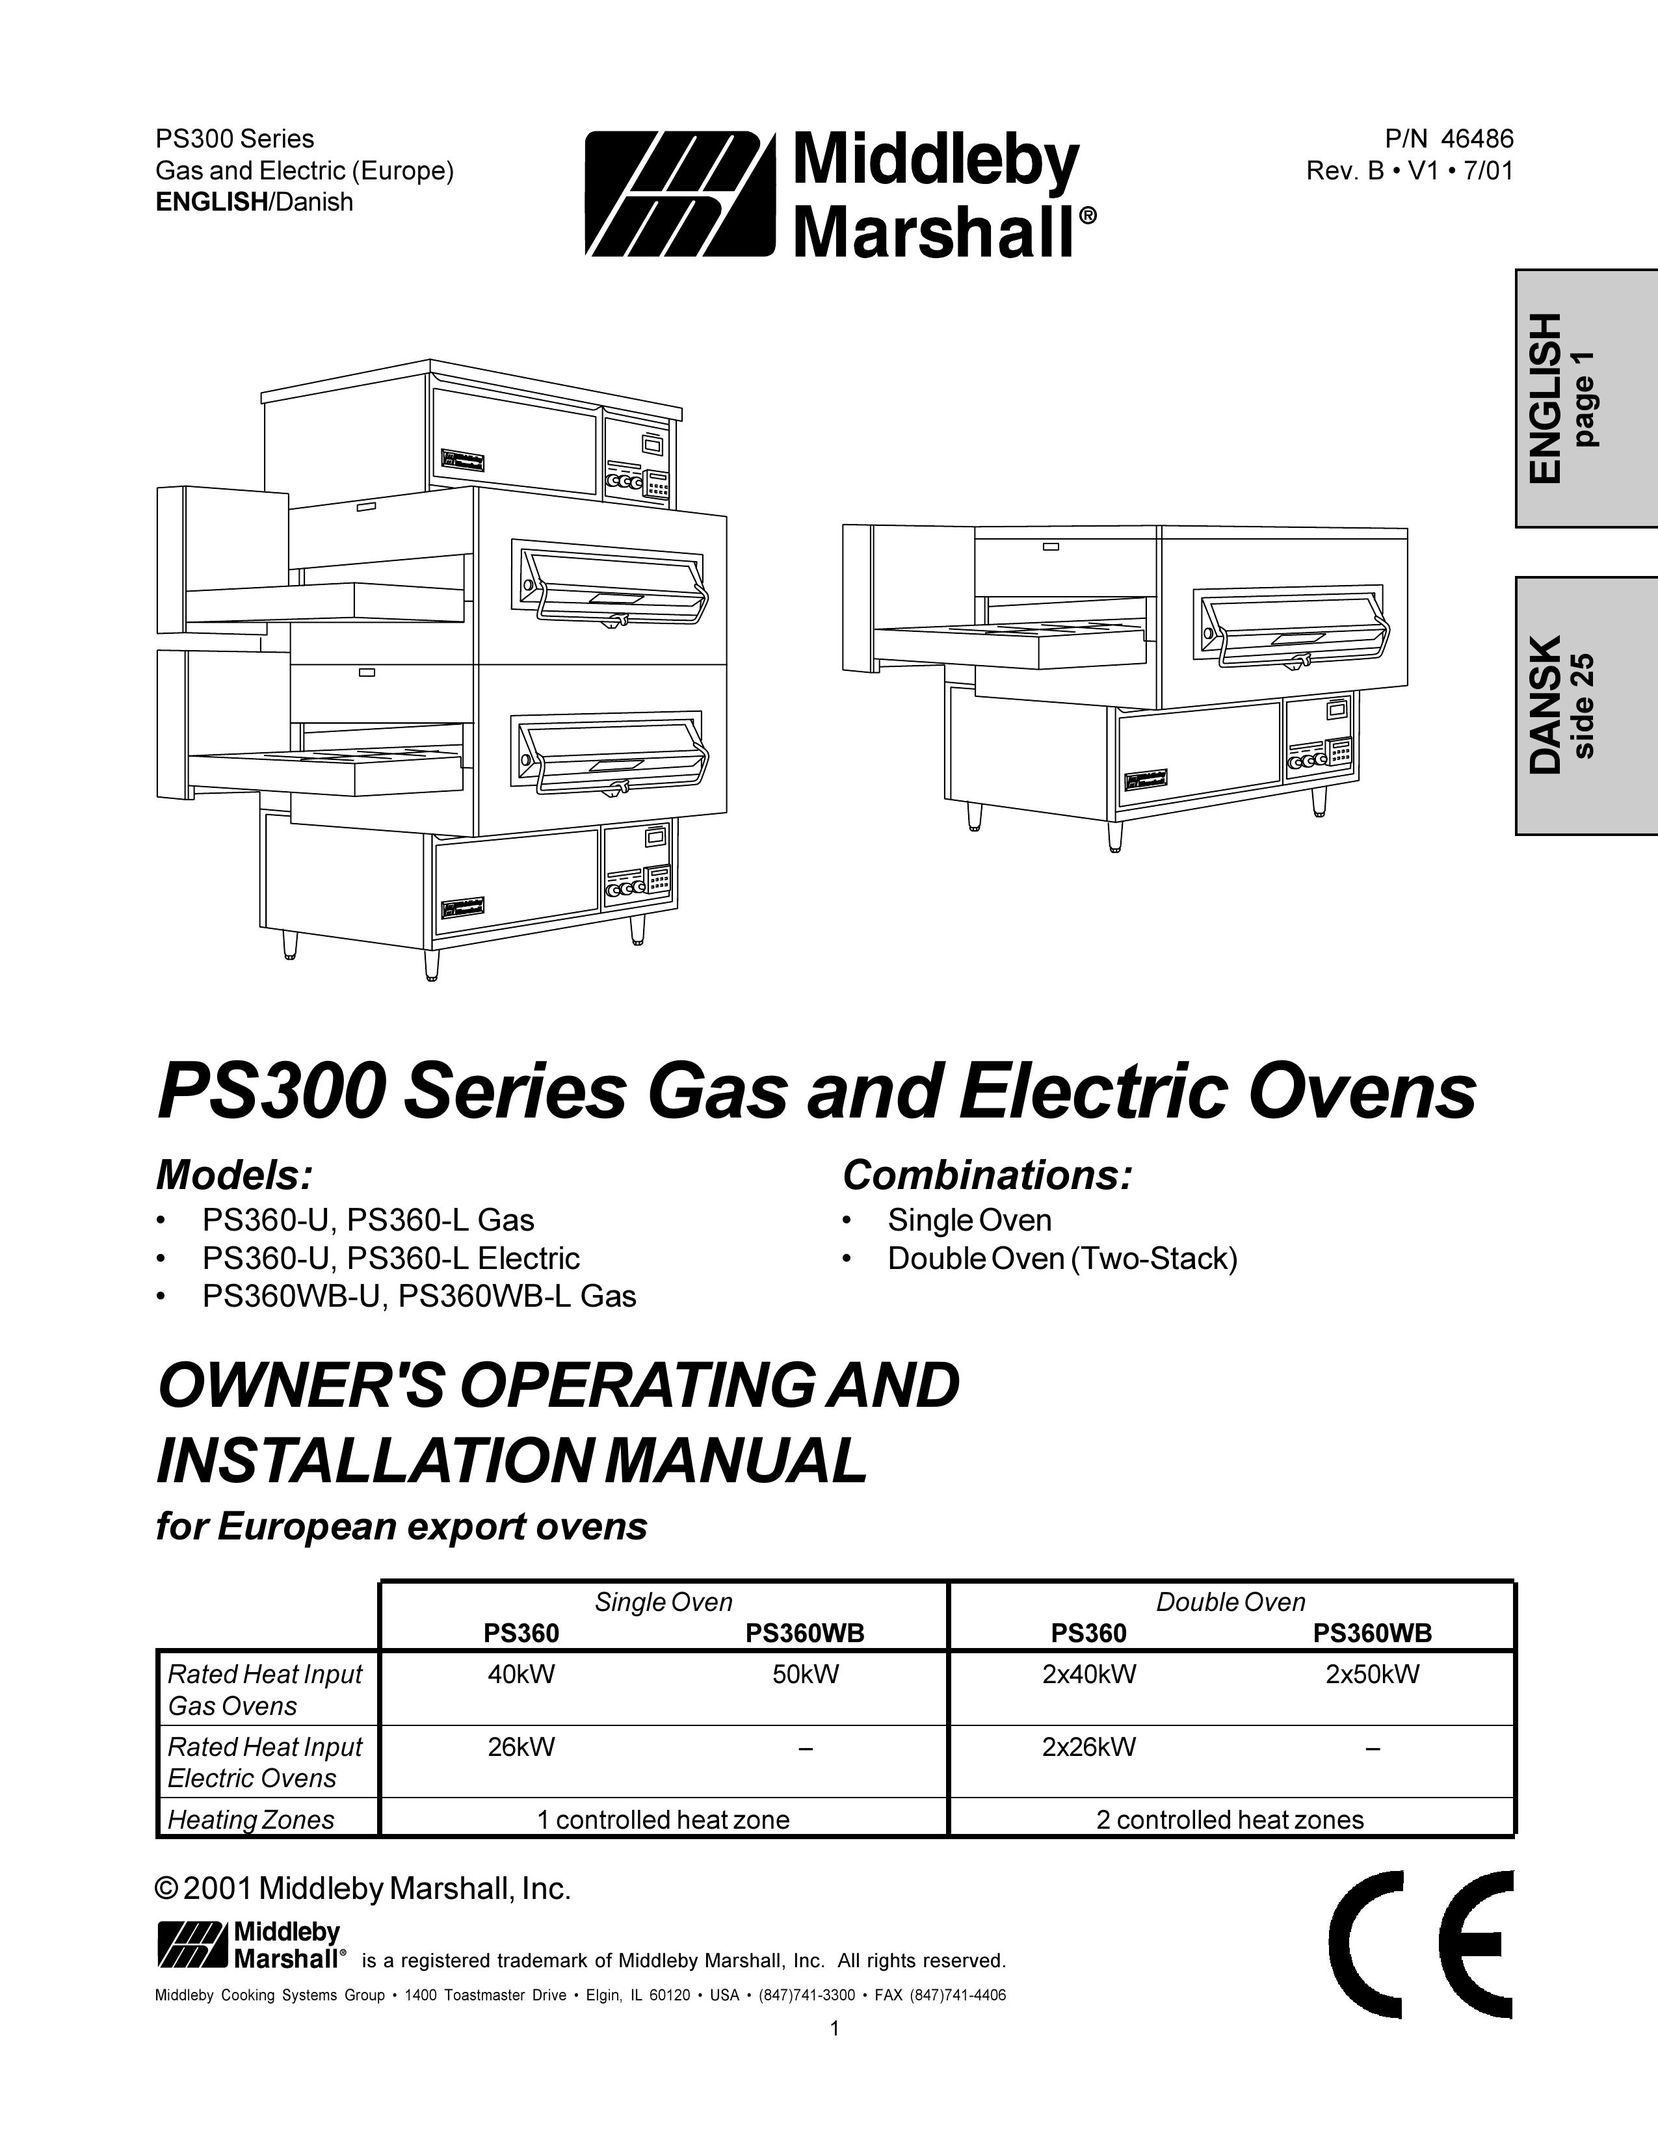 Middleby Marshall PS360WB-U Oven User Manual